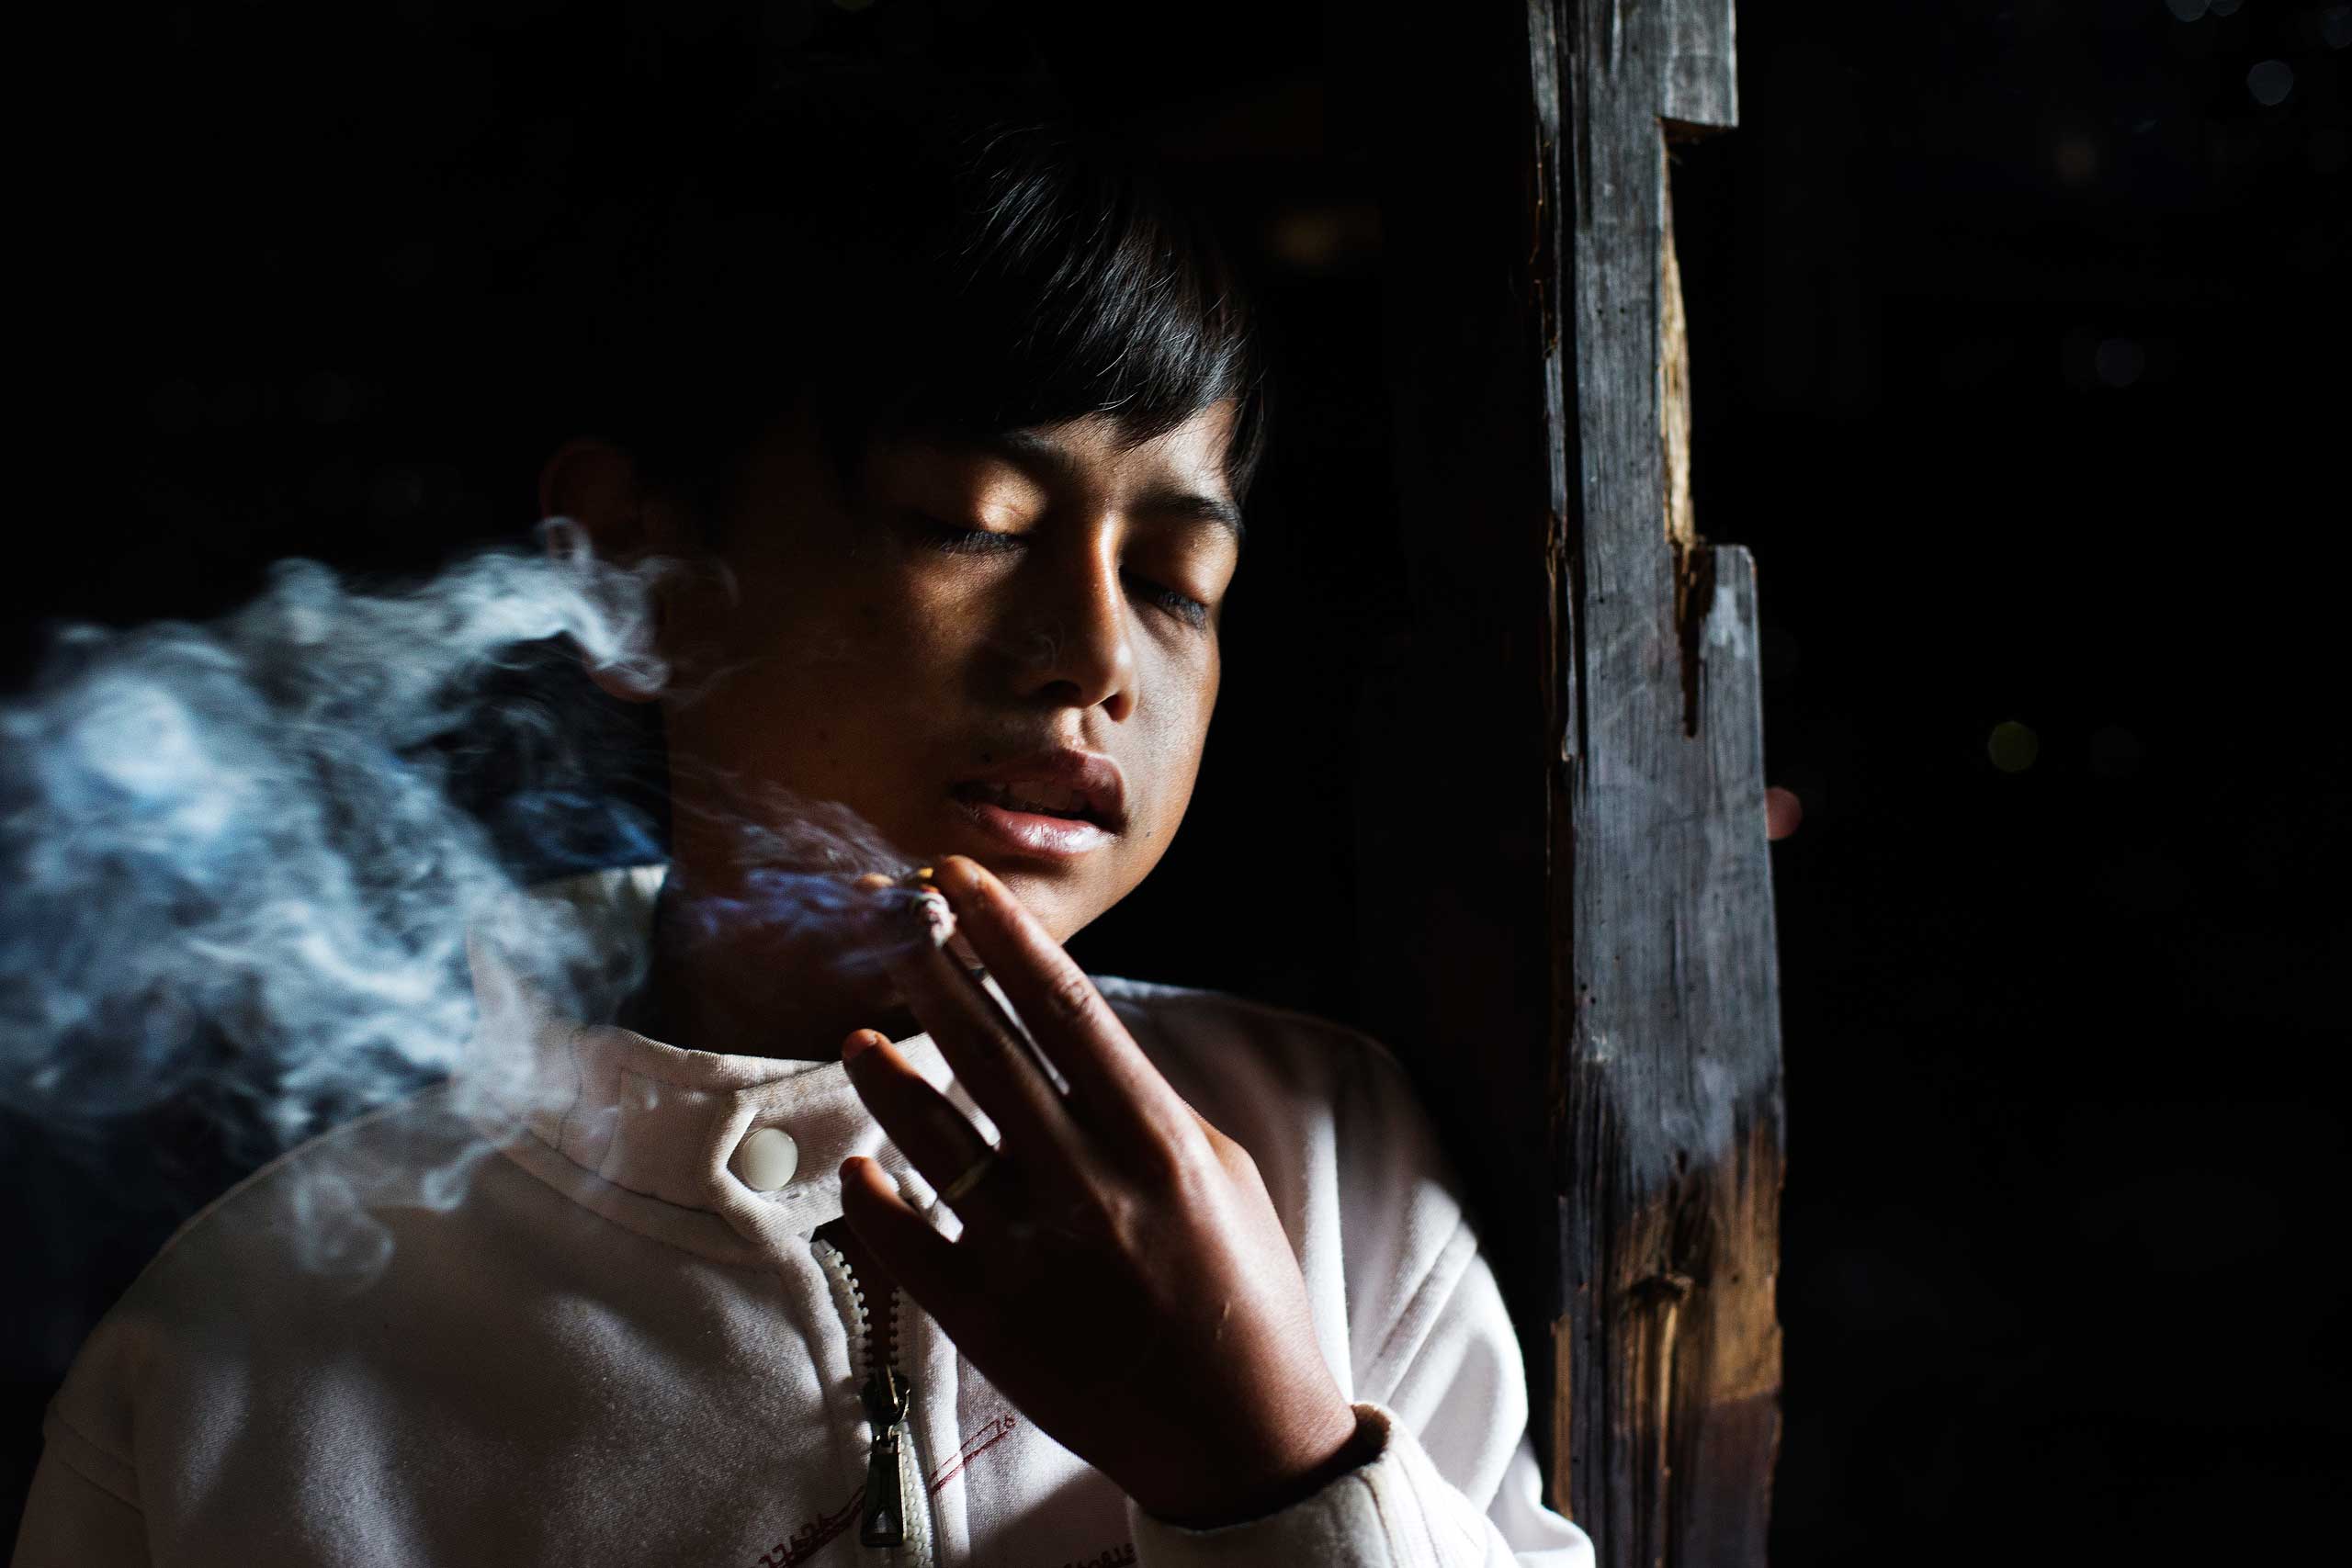 Illham Muhamad, who has smoked since he was five years old, poses for a photo as he slowly inhales his first cigarette of the day at his grandmother's home in Indonesia on February 10, 2014. He does not attend school and if his grandmother refuses to give him money to buy cigarettes he will cry and throw fits.